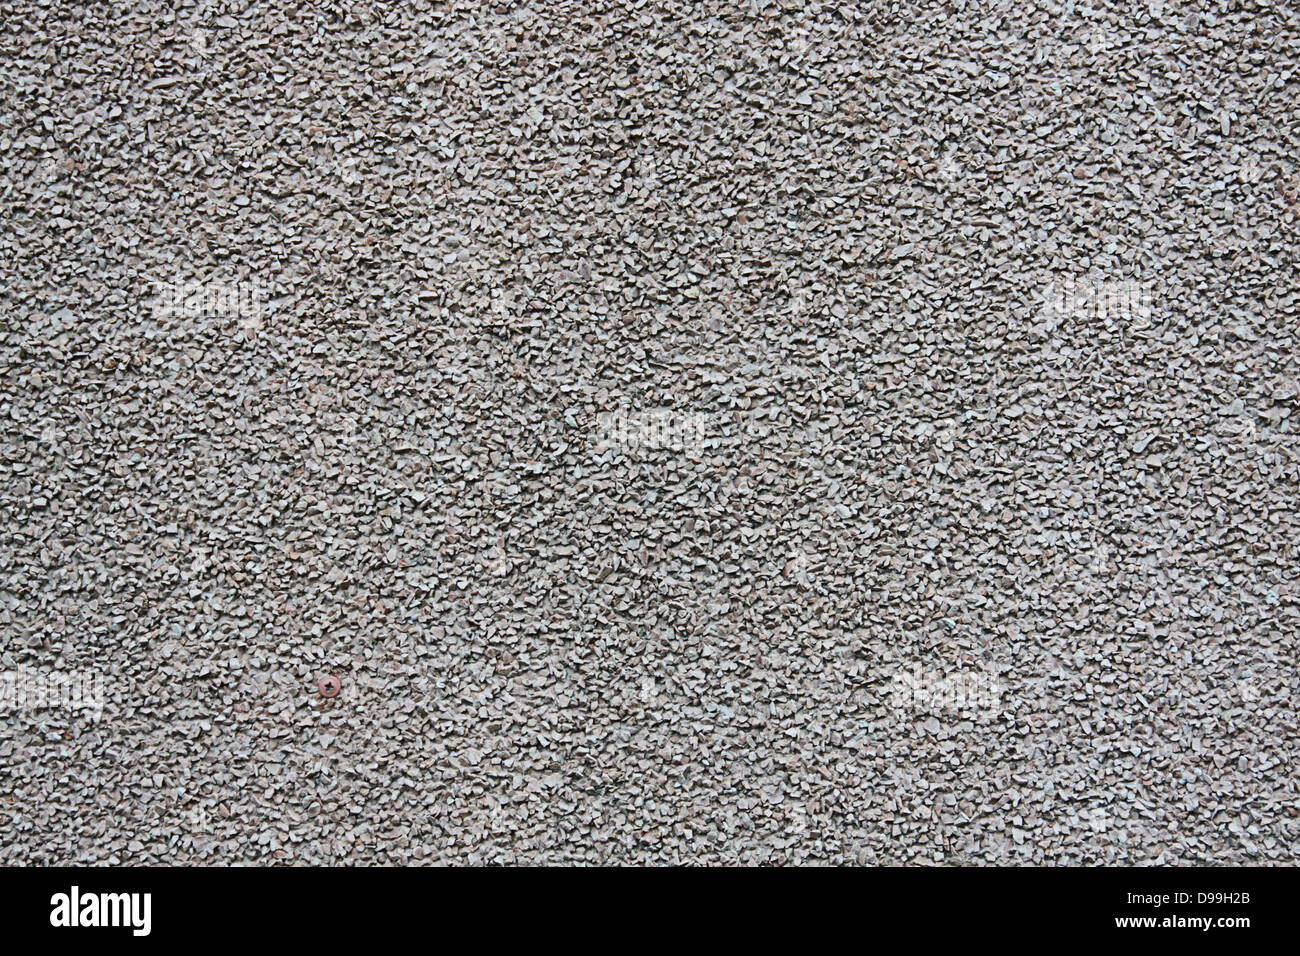 Concrete wall decorated with fine gravel as background Stock Photo